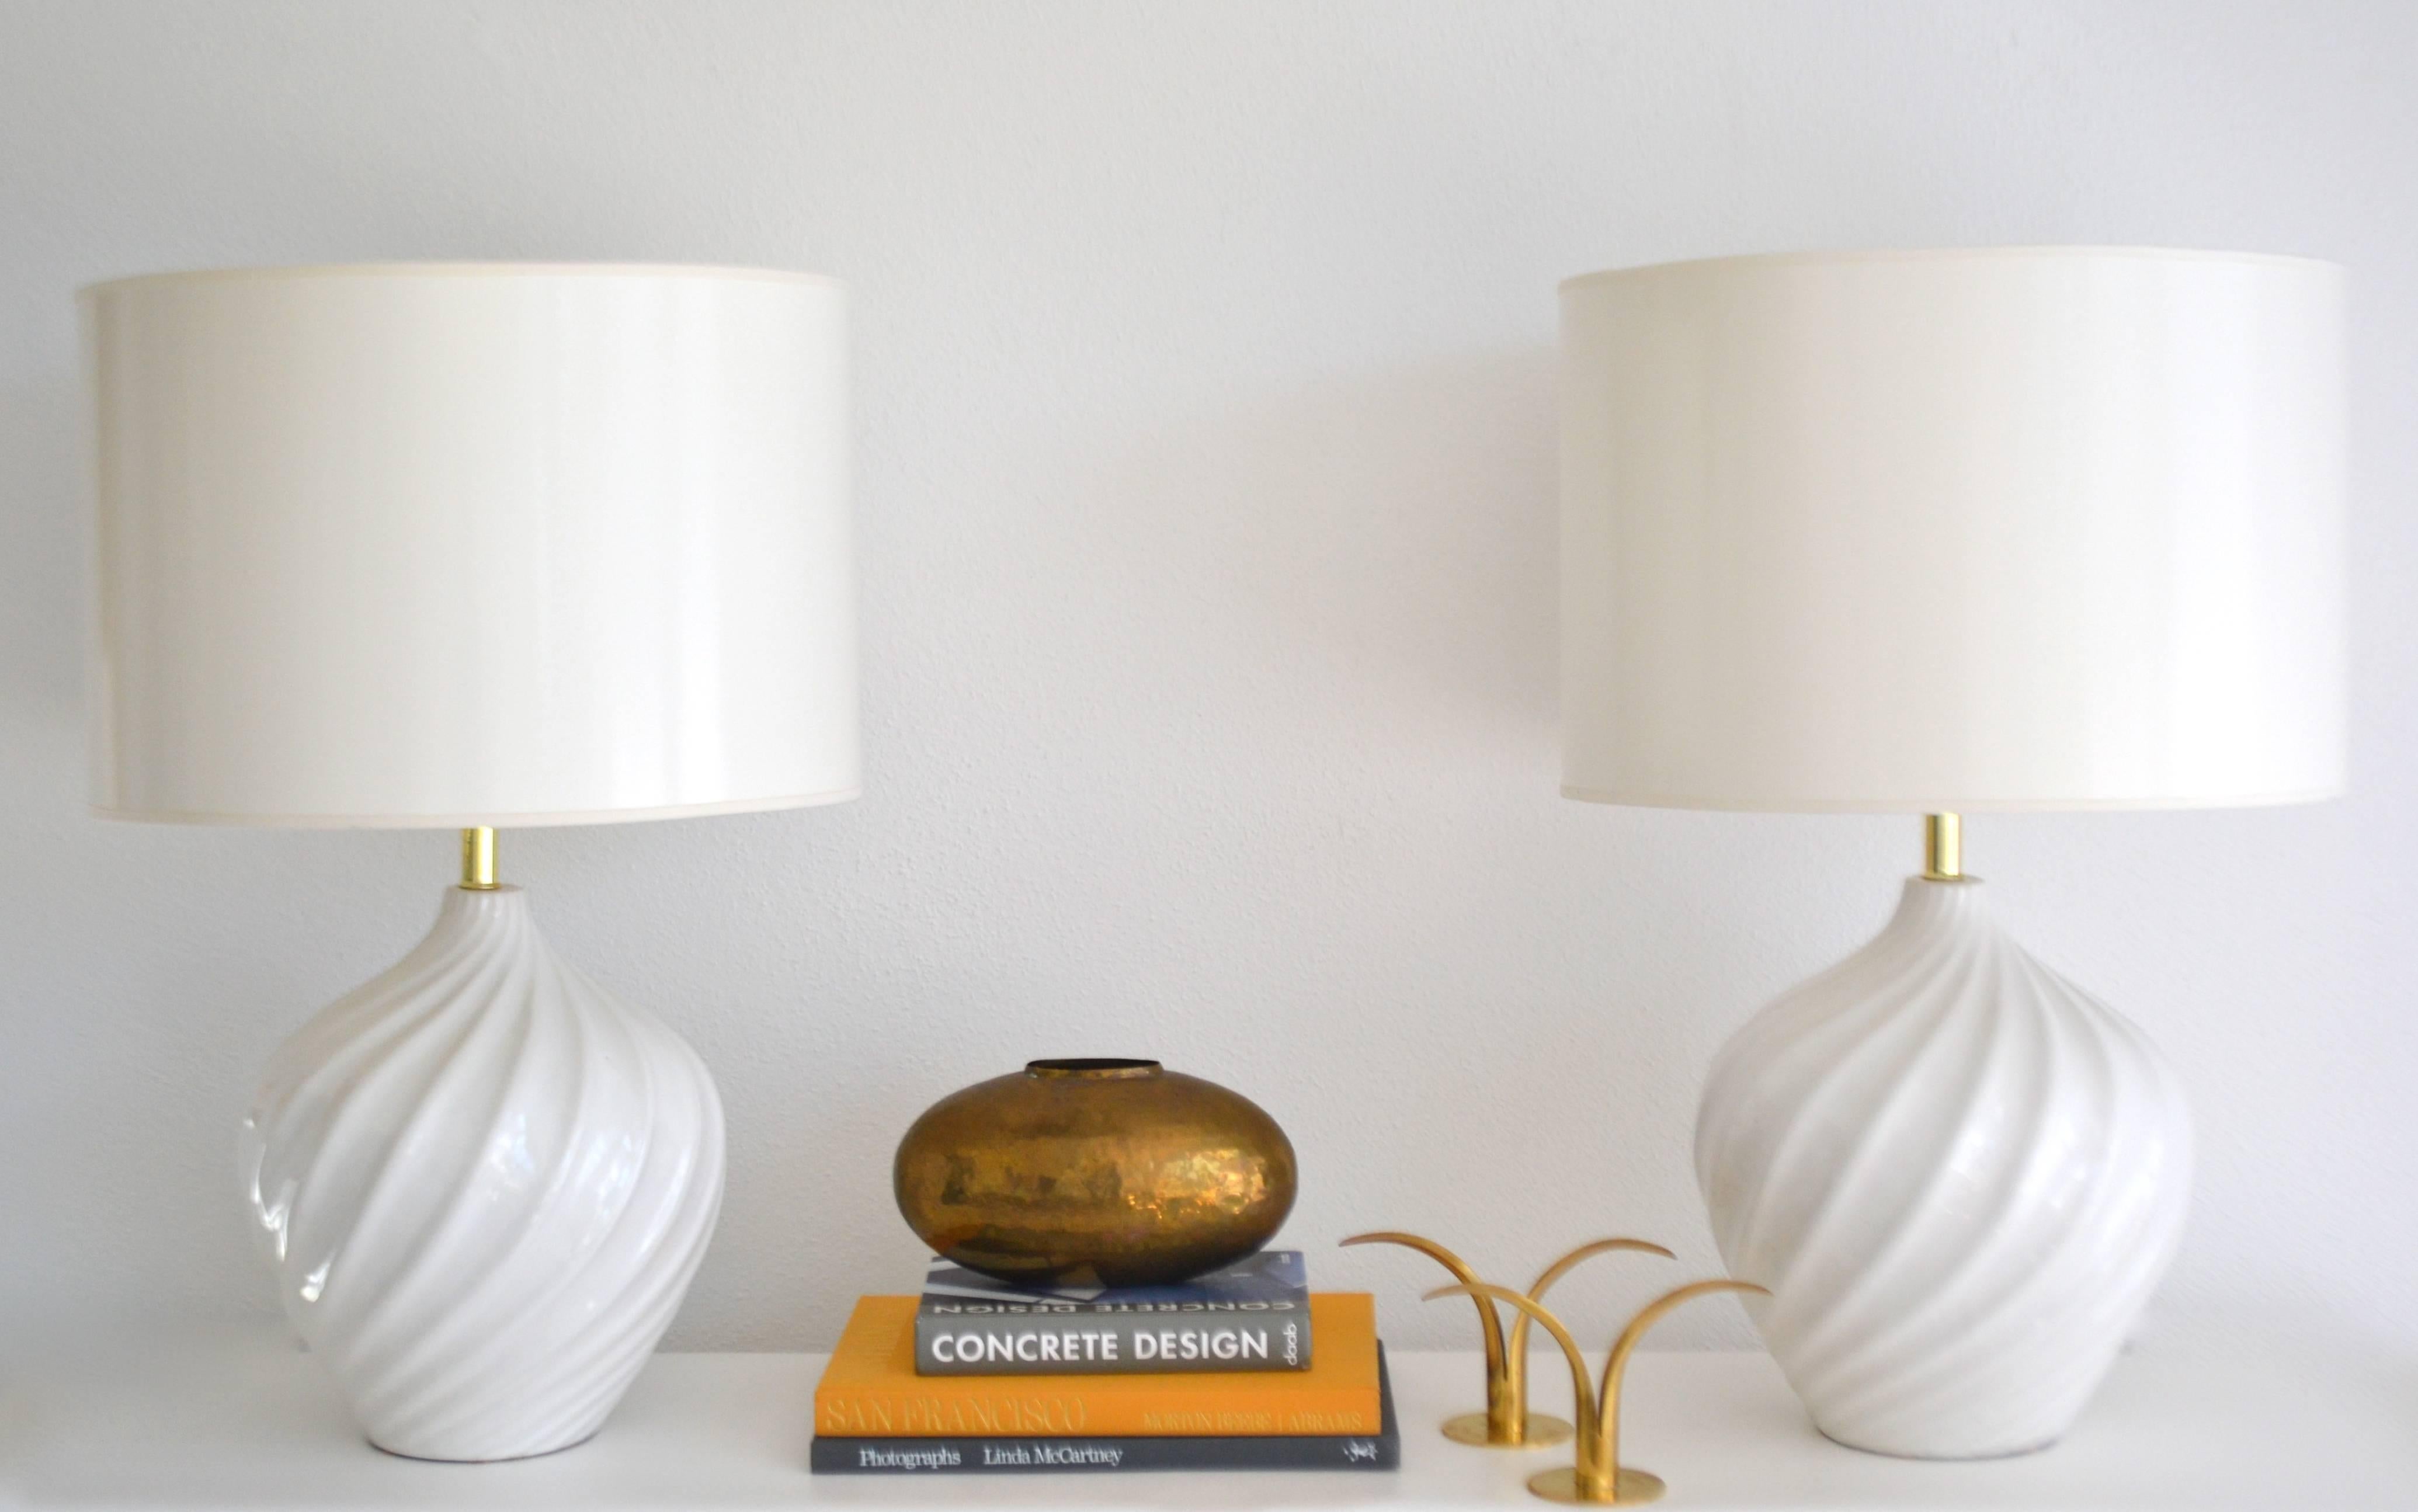 Stunning pair of Mid-century Blanc de Chine Jar form table lamps, circa 1960s. These striking lamps are artisan crafted to resemble rippled crest patterns and are wired with brass fittings.
Shades not included.
Measurements: 
Overall: 28.5